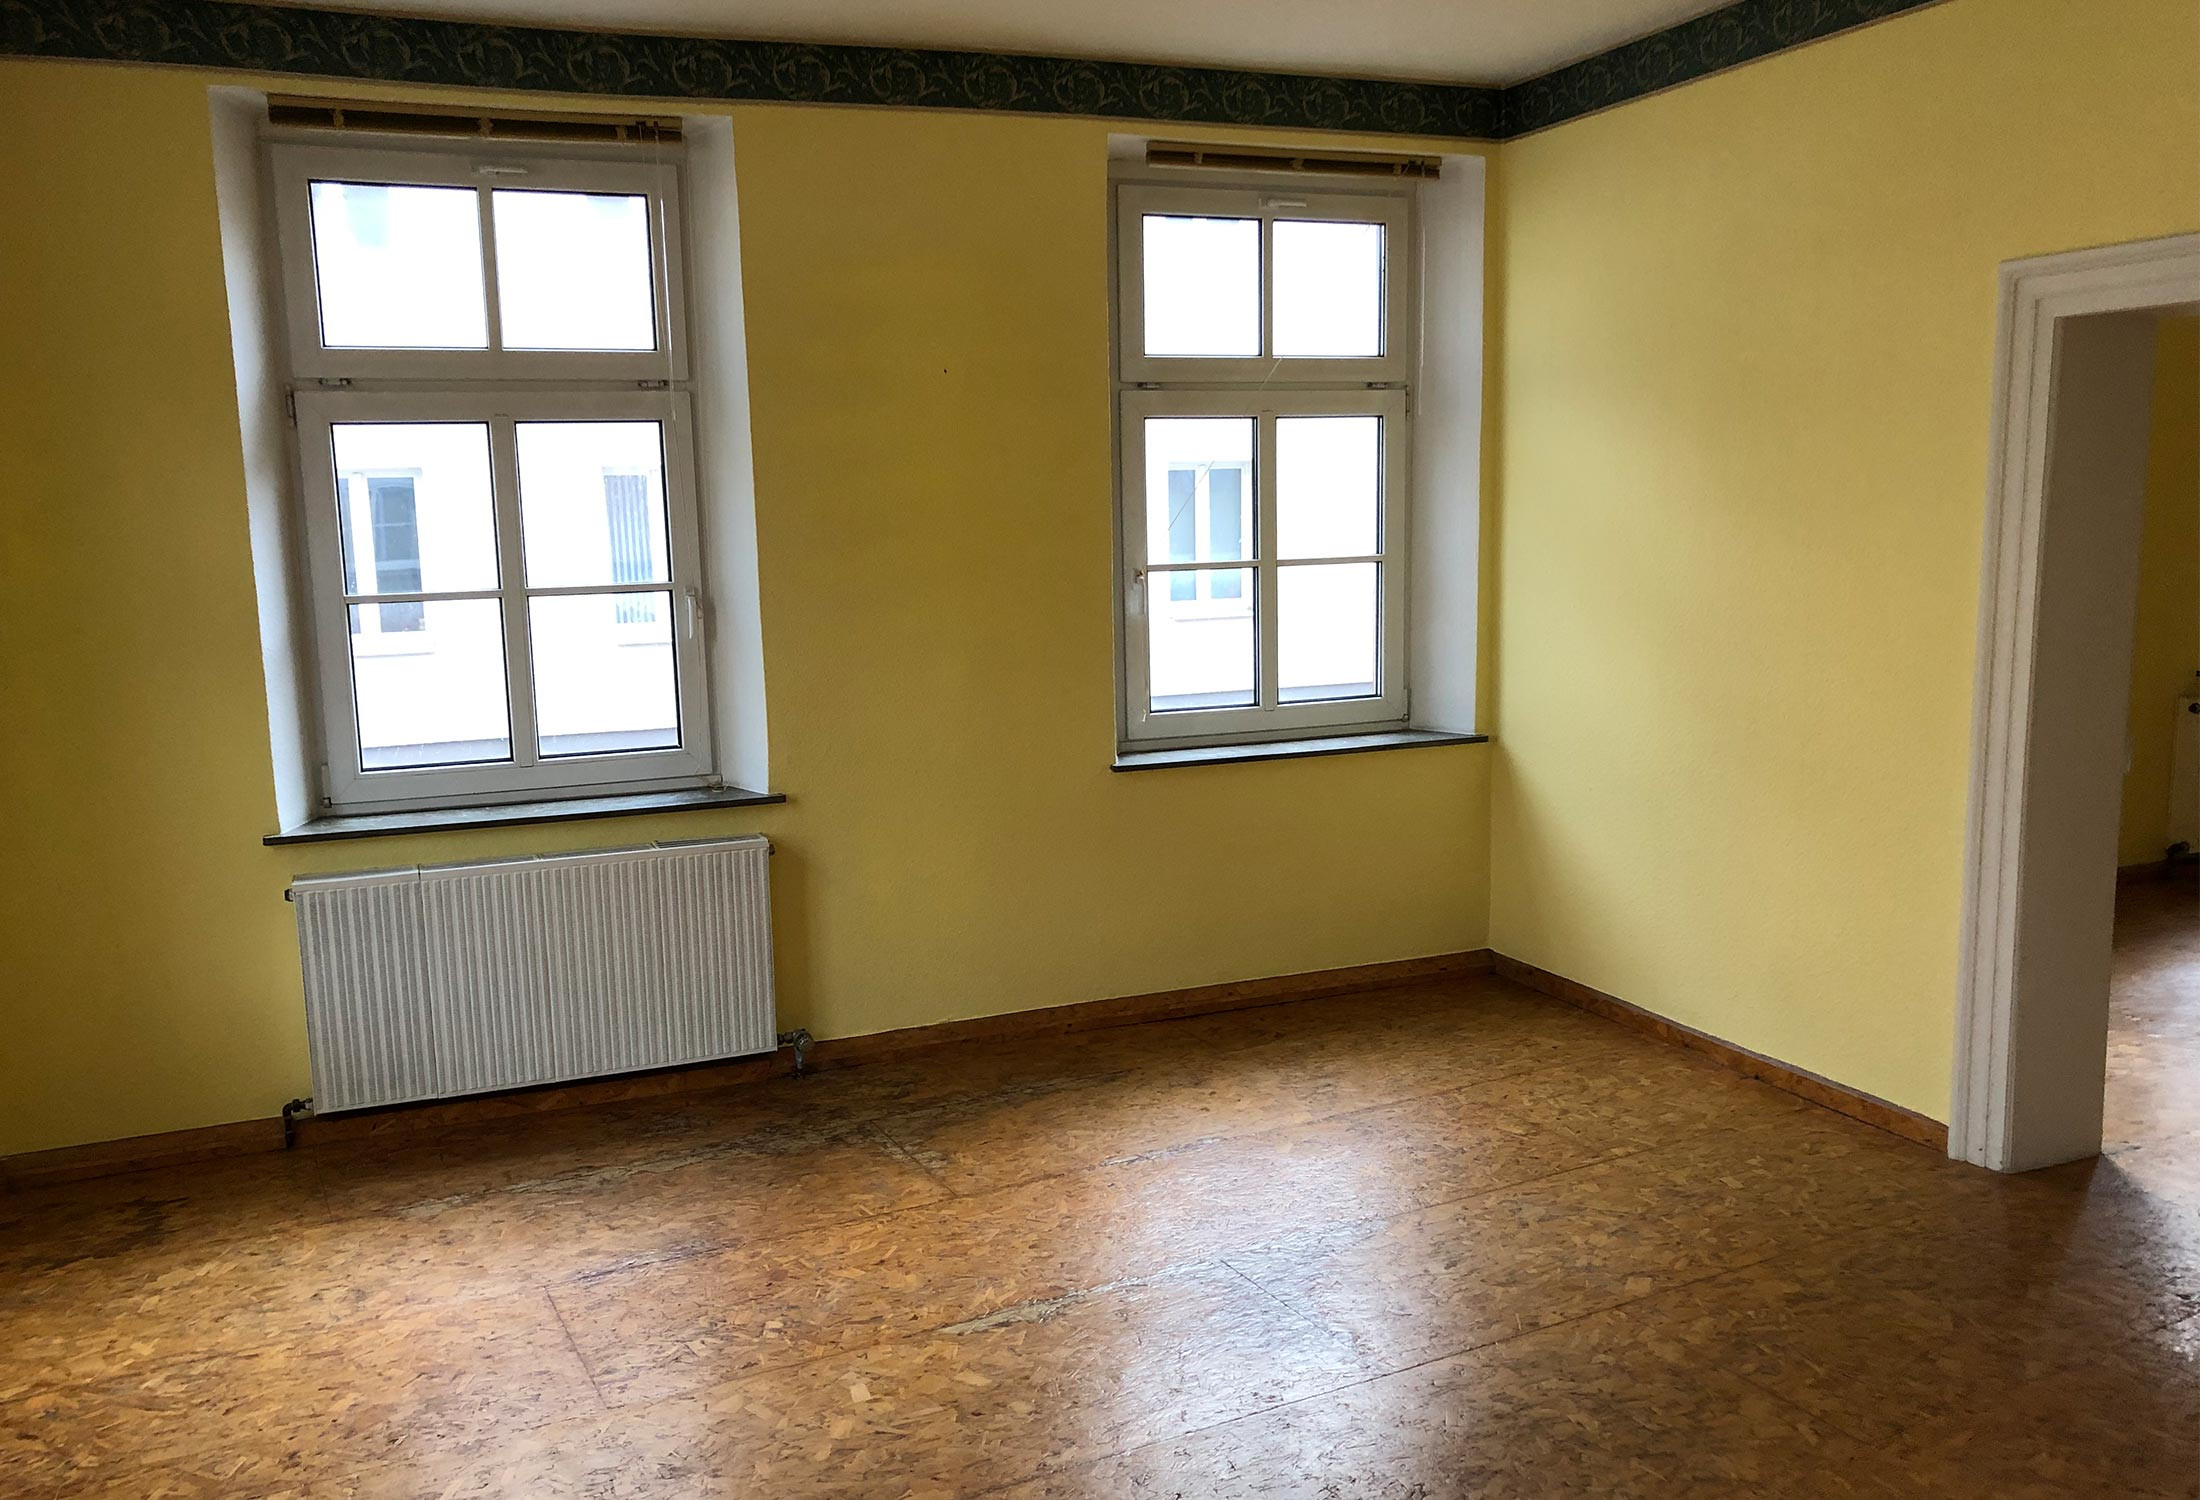 Wohnung Bayreuth
 CSW Immobilien